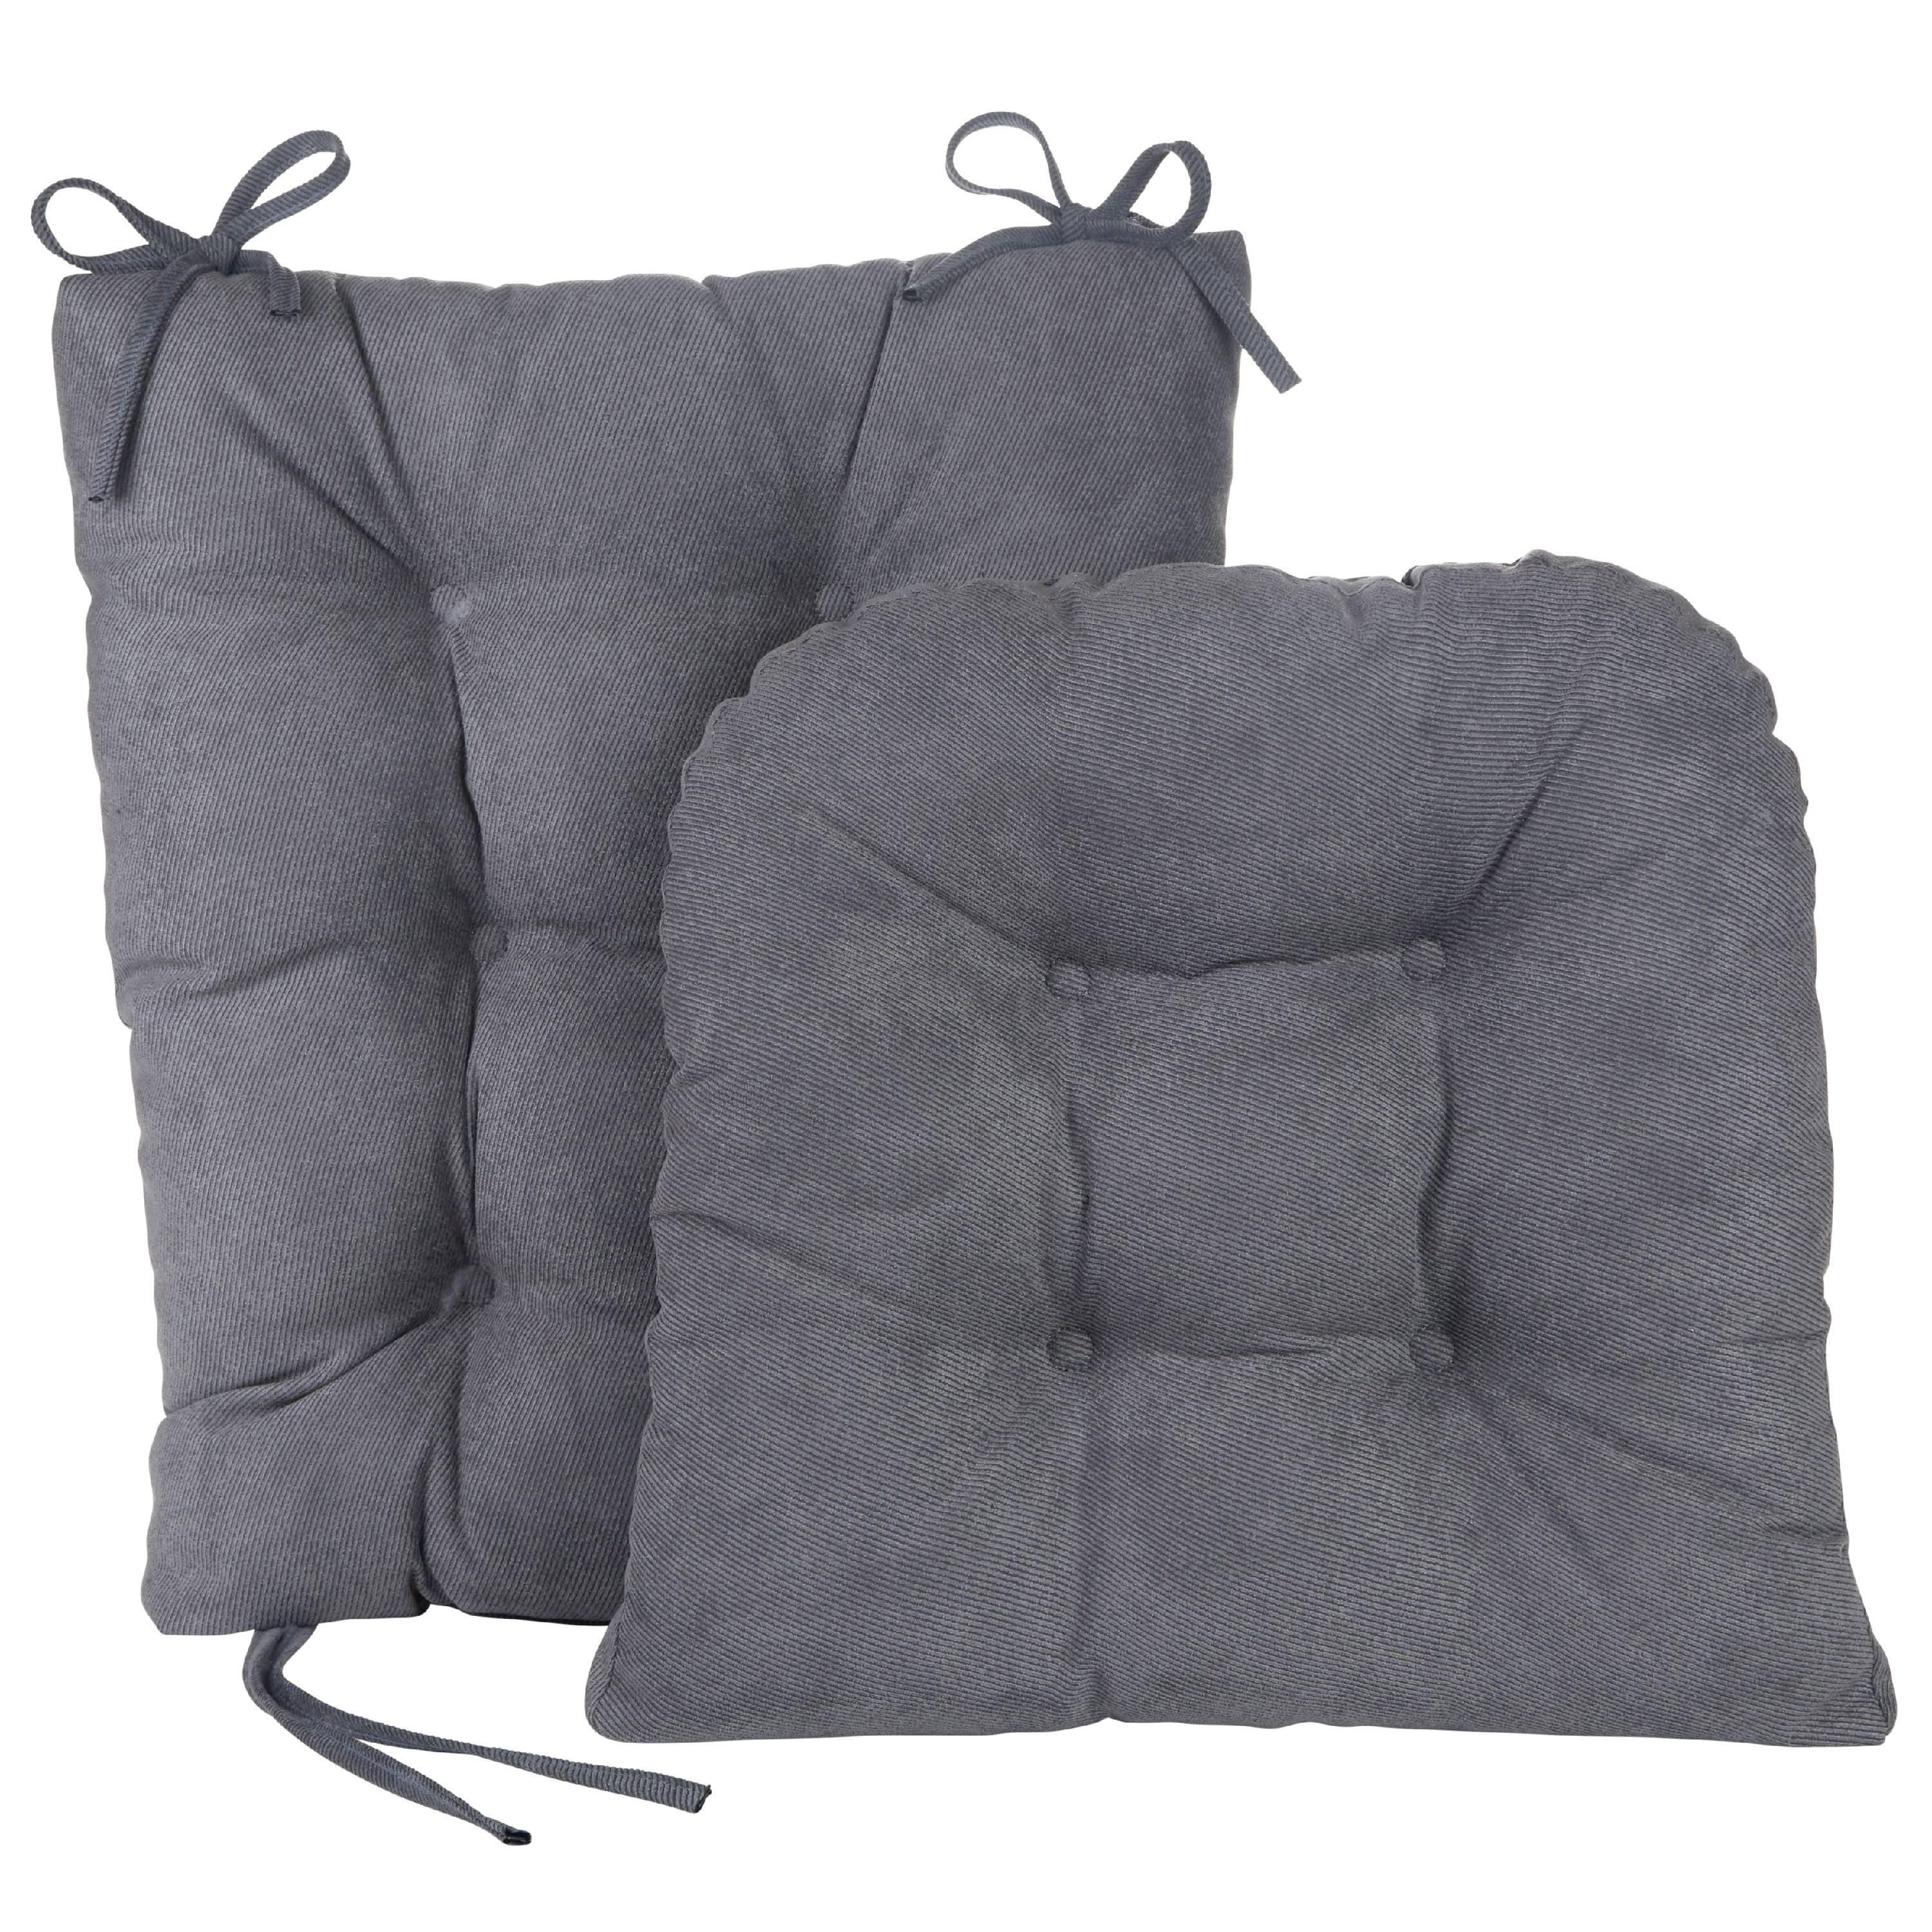 Big Hippo Rocking Chair Cushion,Soft Thicken Rocking Chair Cushion Set with  Detachable Neck Pillow Back Support, Comfy Chair Cushion Pad with Ties for  Outdoor Indoor Home Office 